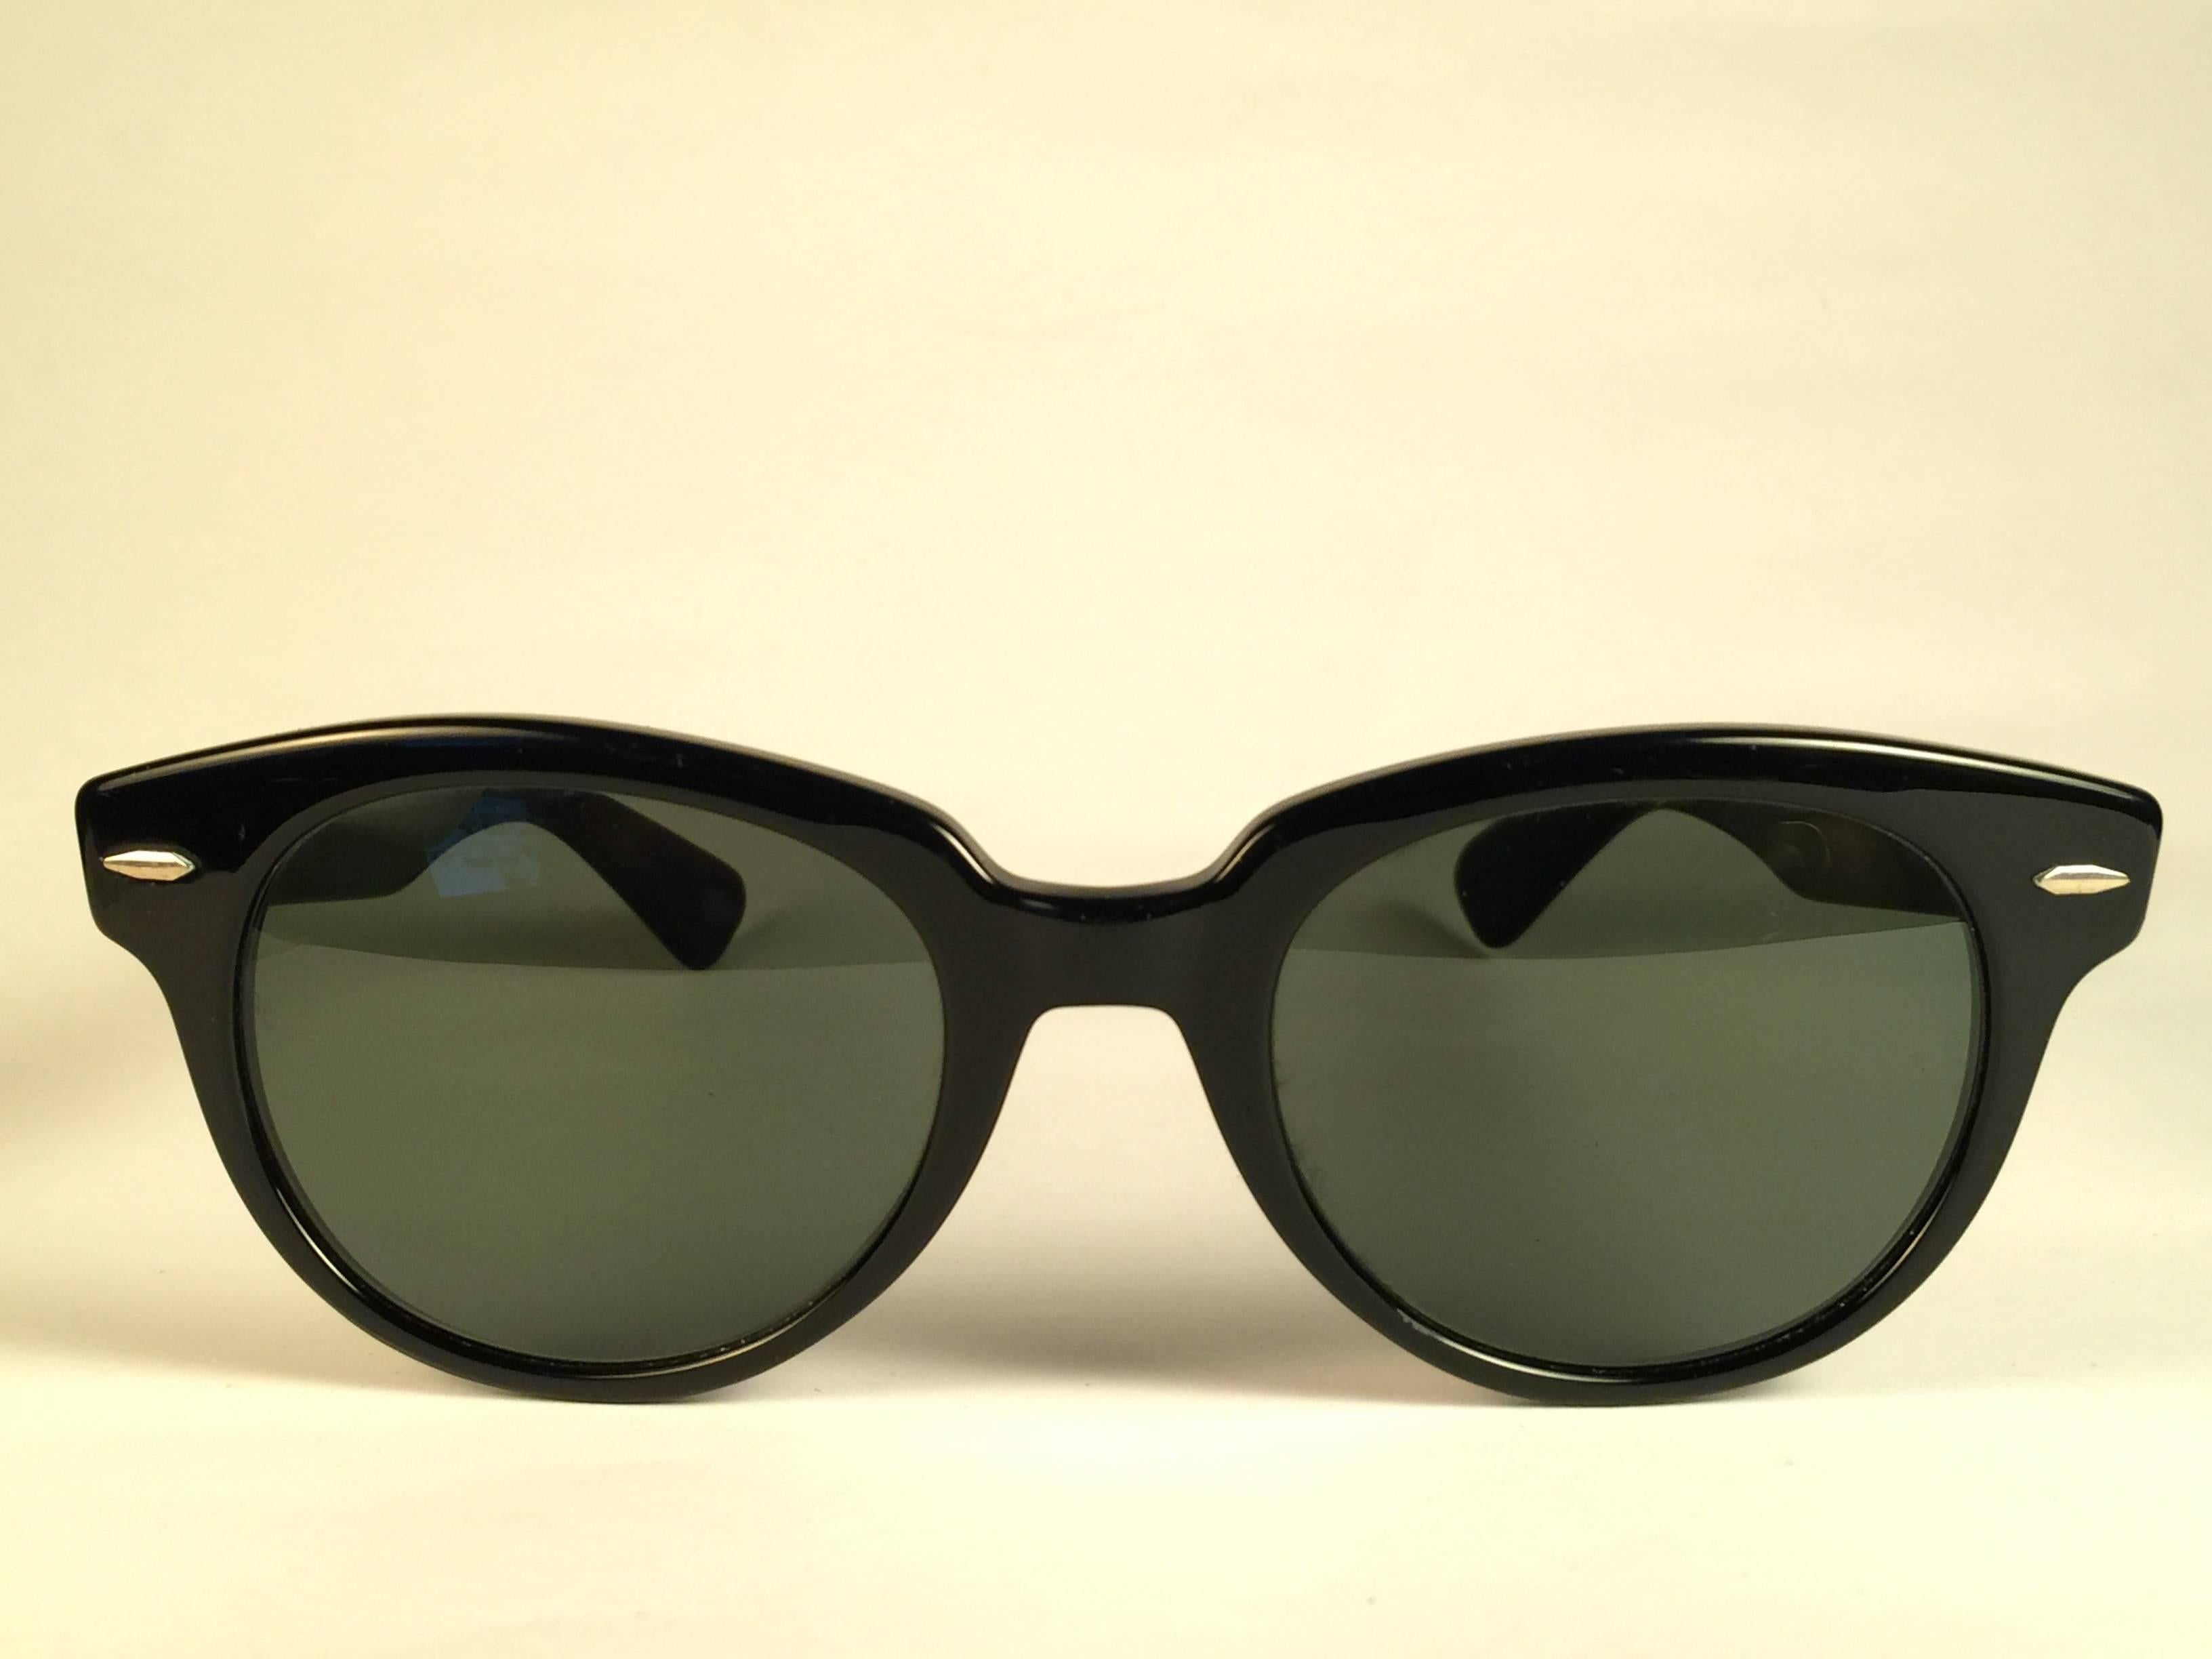 New classic Orion in black. B&L etched in both G15 grey lenses. 
Please notice that this item is nearly 40 years old and could show some storage wear.  
New, ever worn or displayed. Original Ray Ban B&L case.